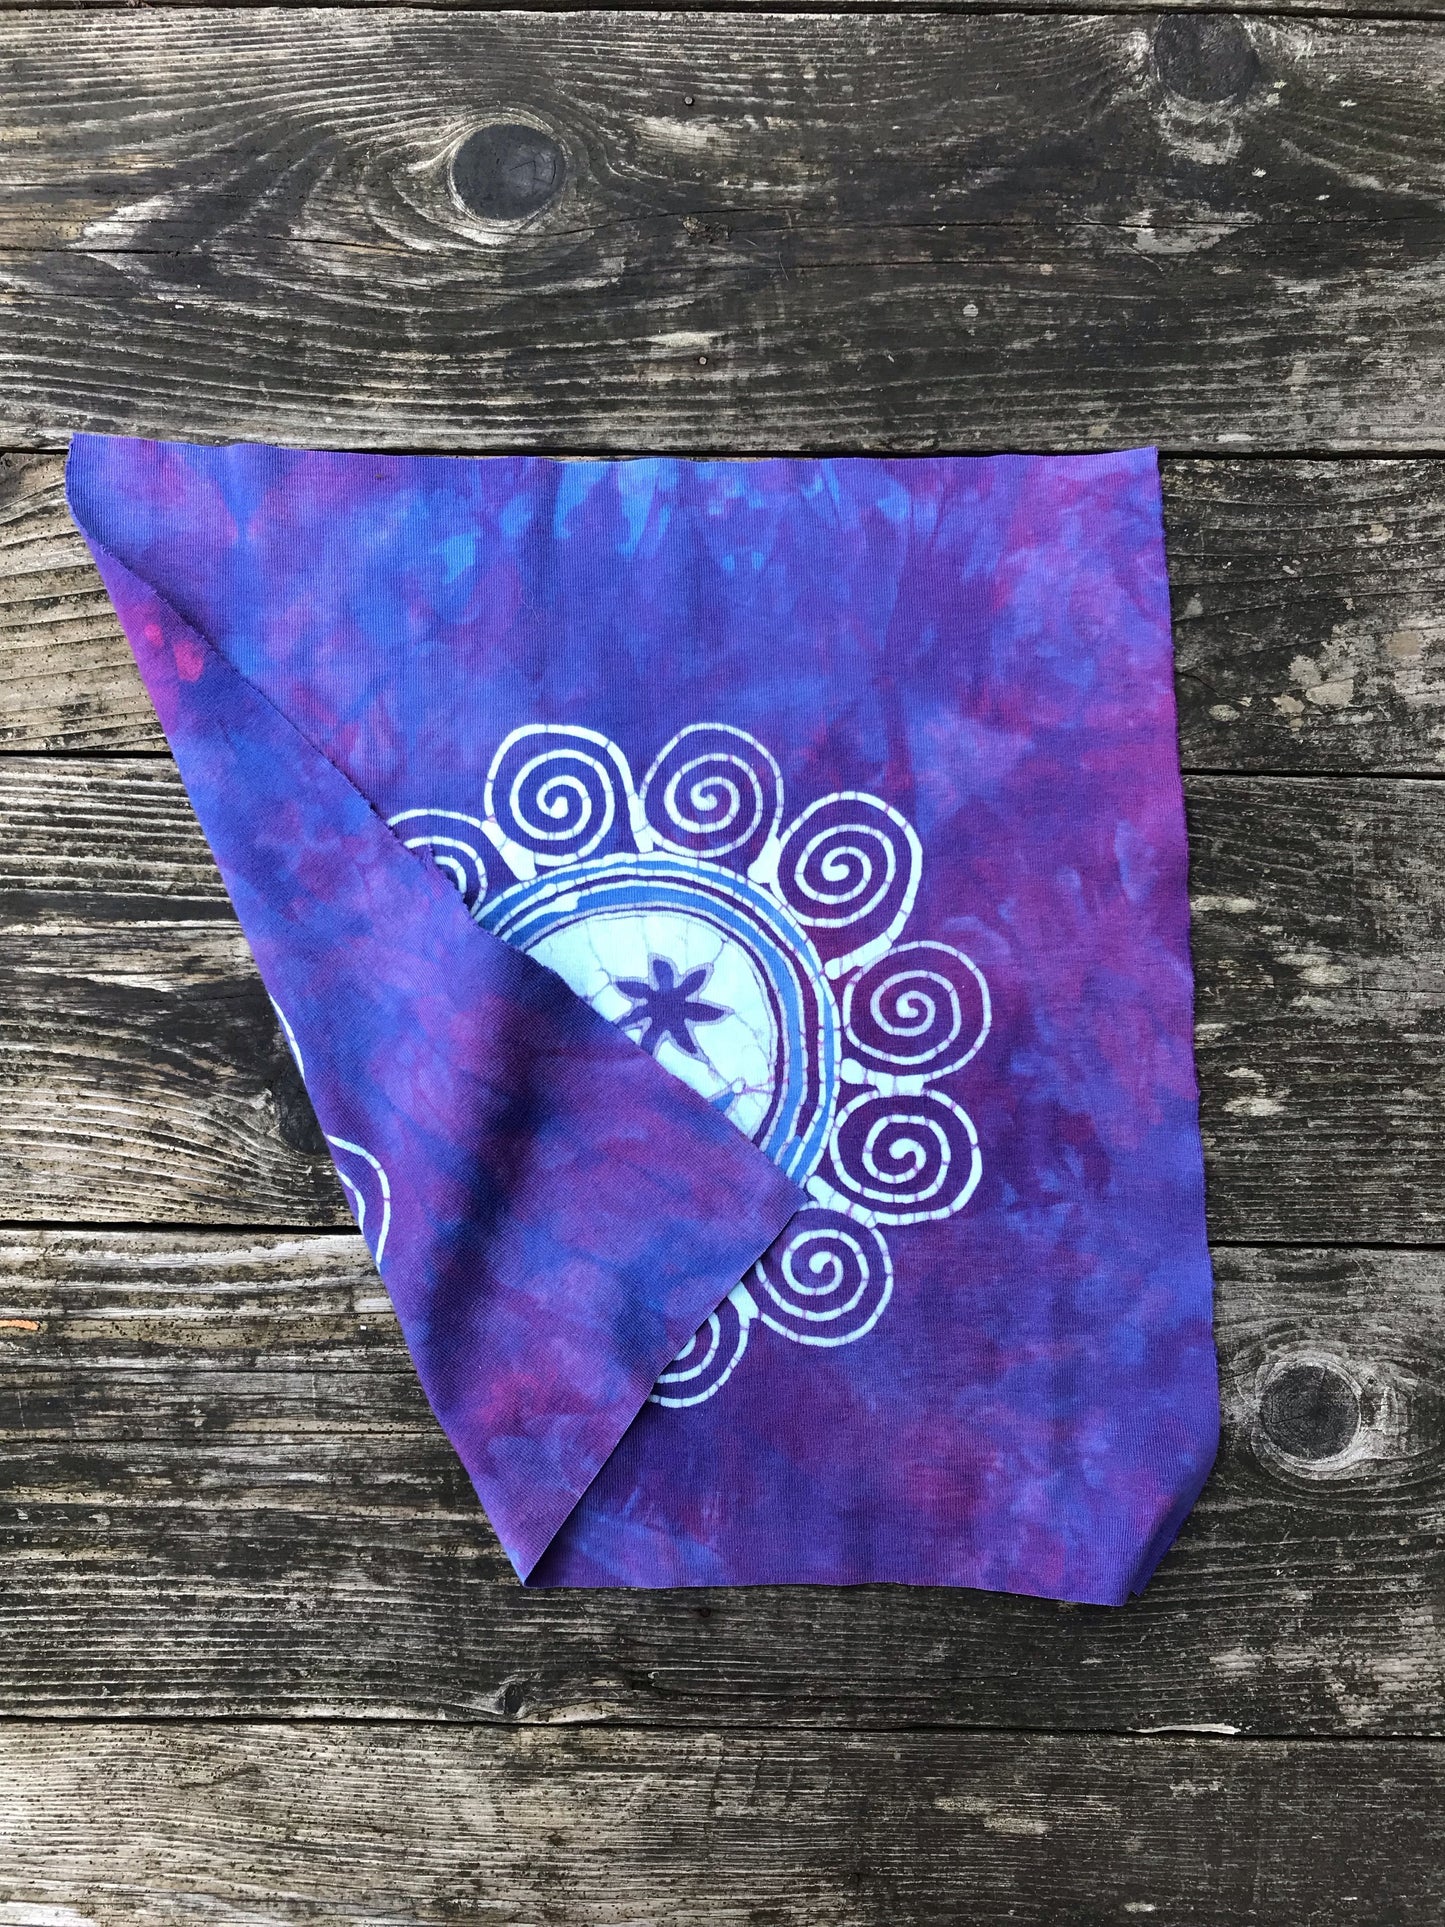 Hand Painted Batik Fabric Square - Moon Marble in Purple and Periwinkle Batikwalla by Victoria 